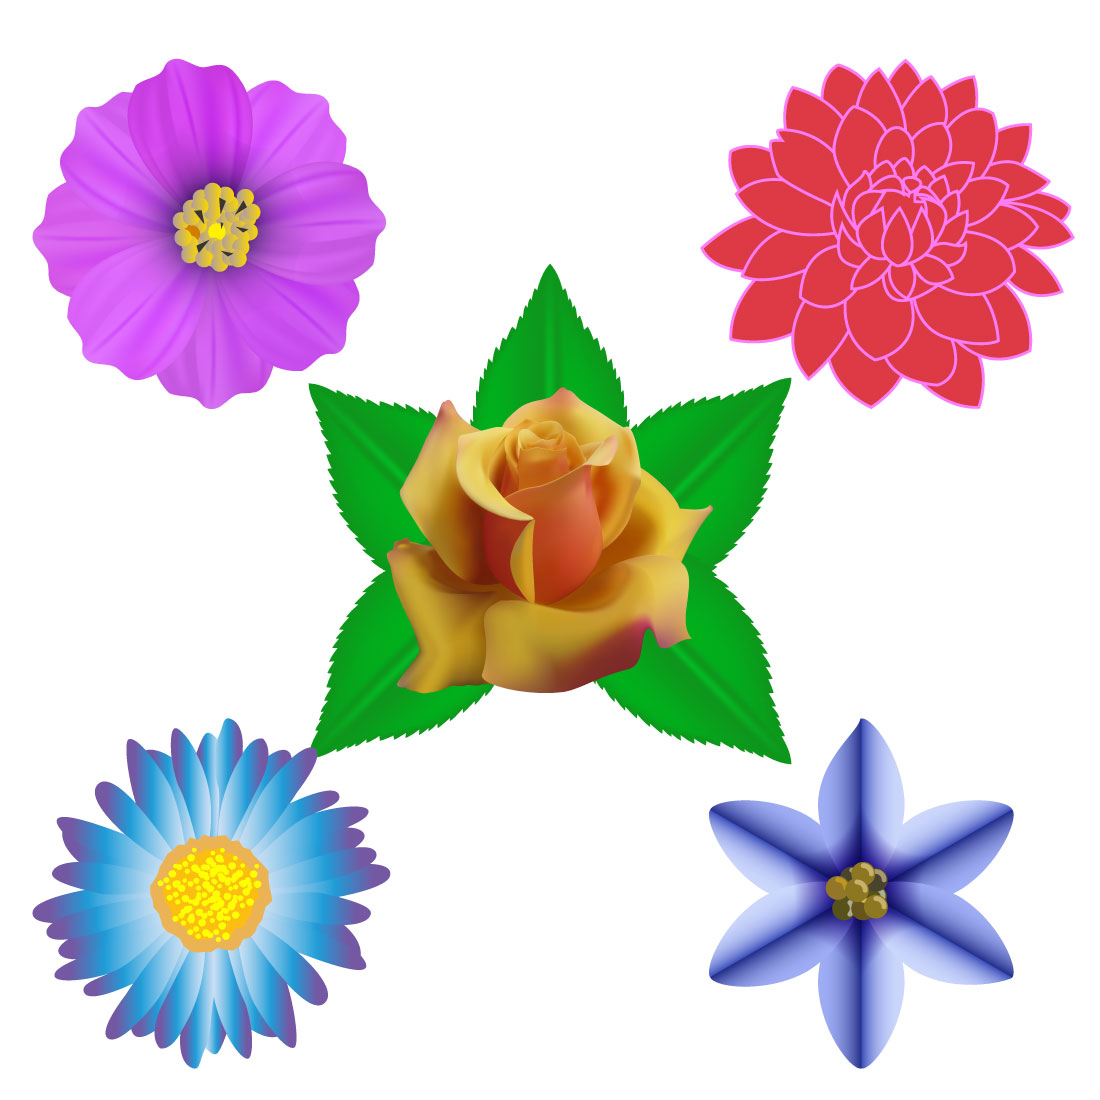 Flower Collection Vector Design cover image.